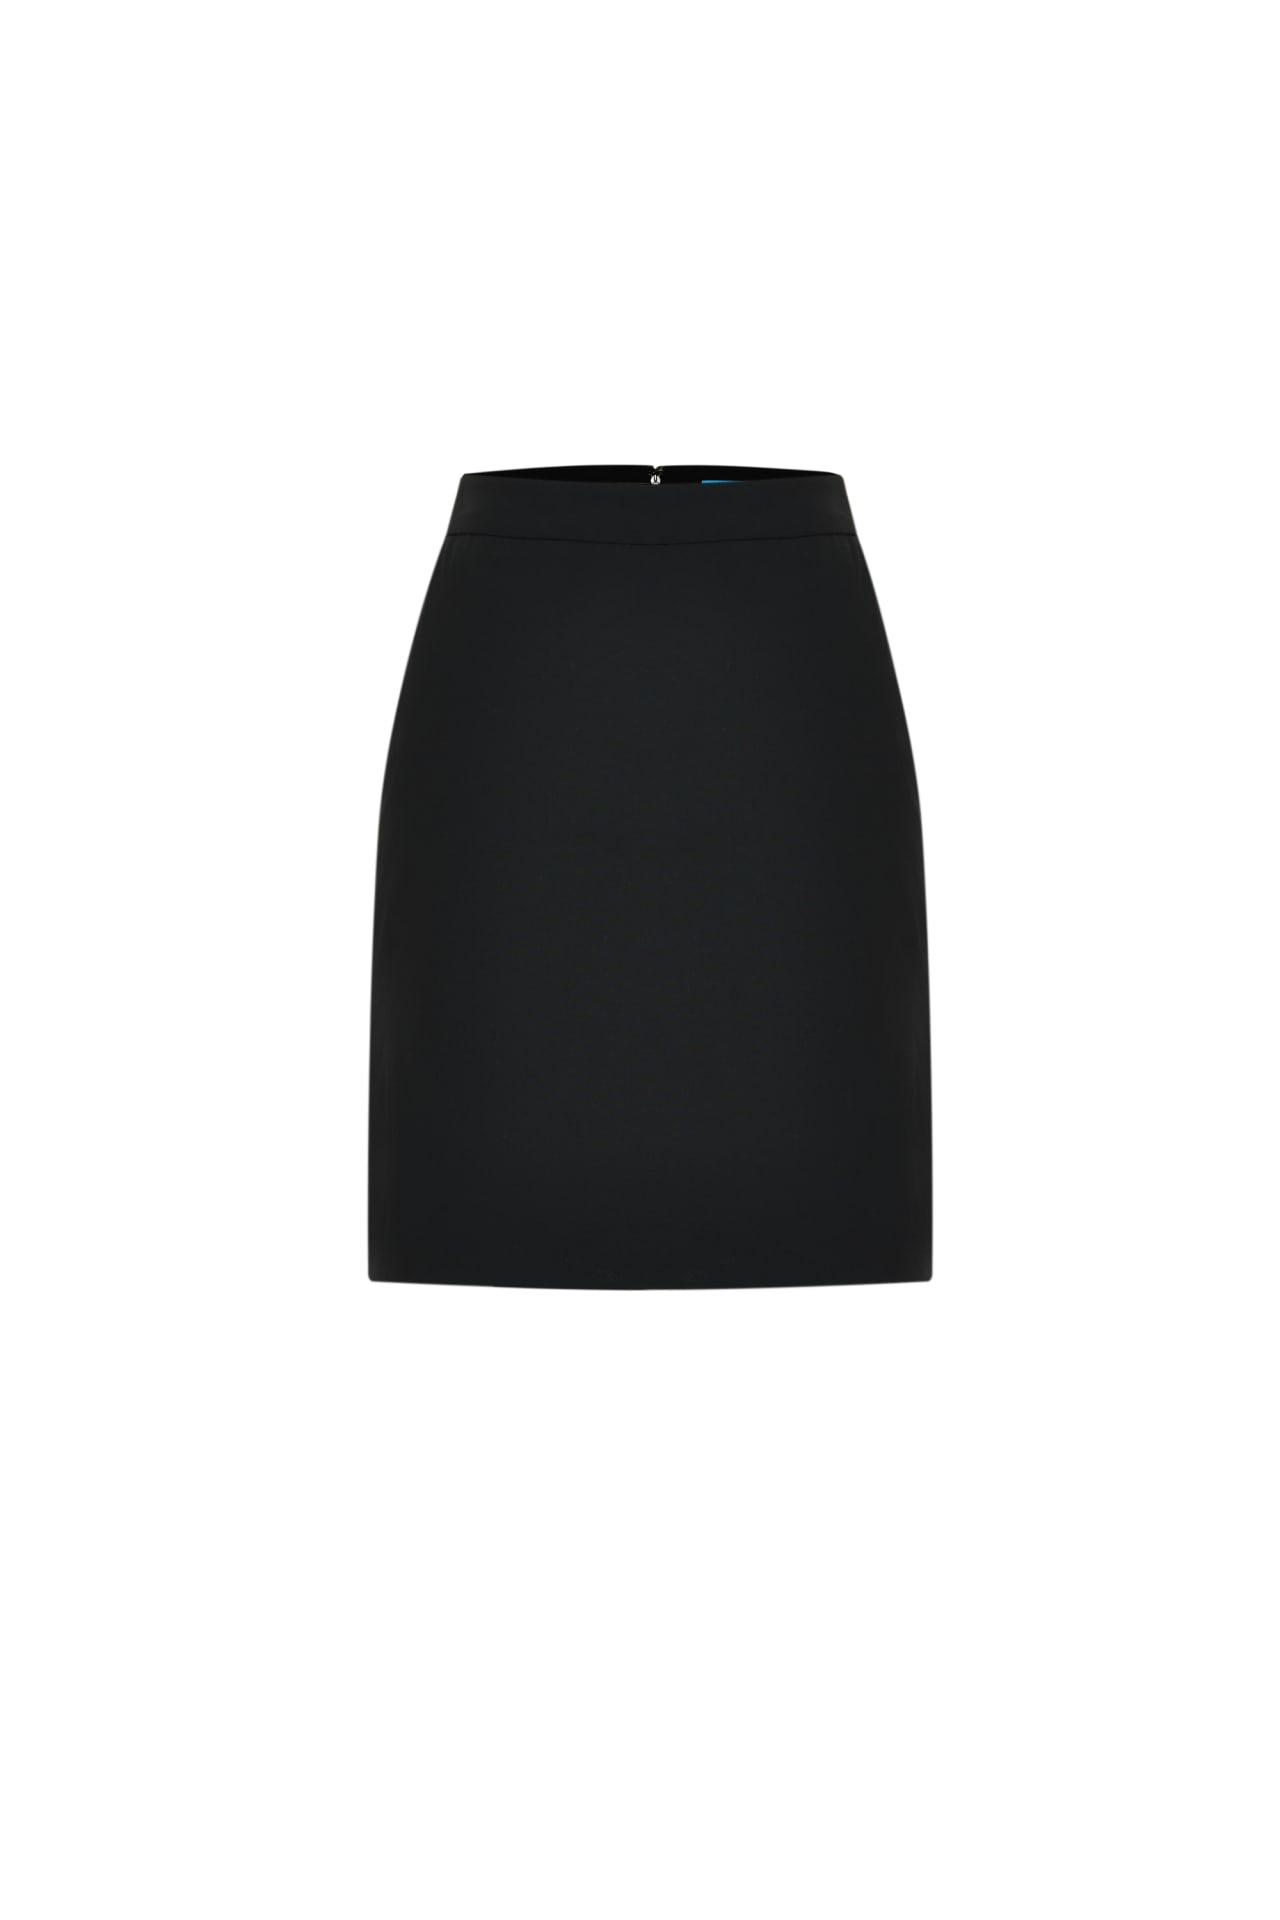 Penny Cooling Multi Way Stretch Plain H-Shaped Skirt